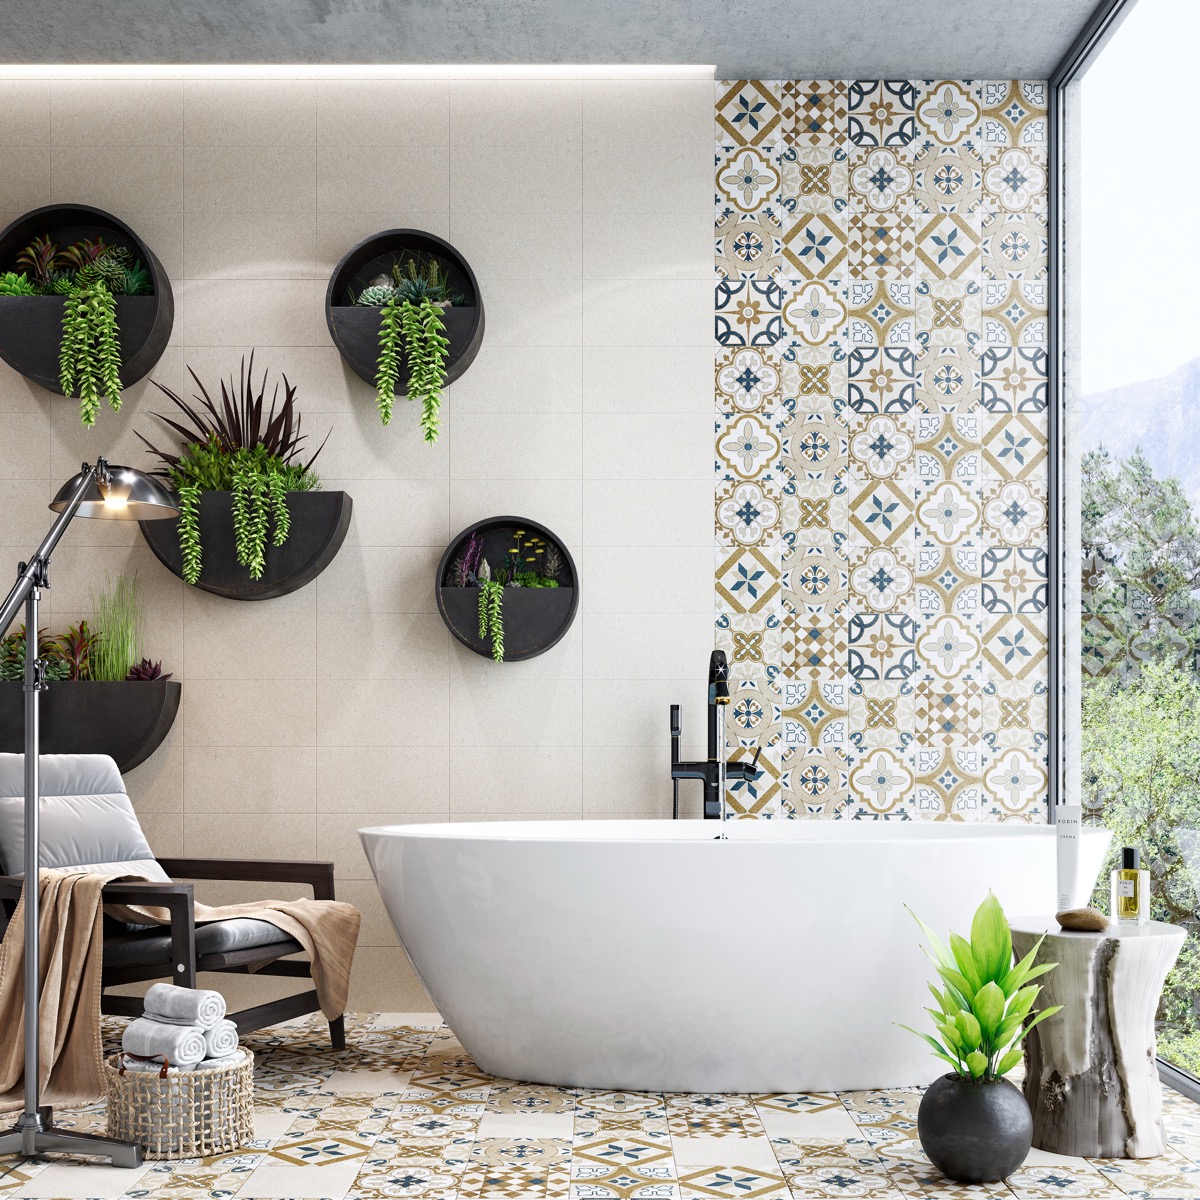 51 modern bathroom design ideas plus tips on how to accessorize yours